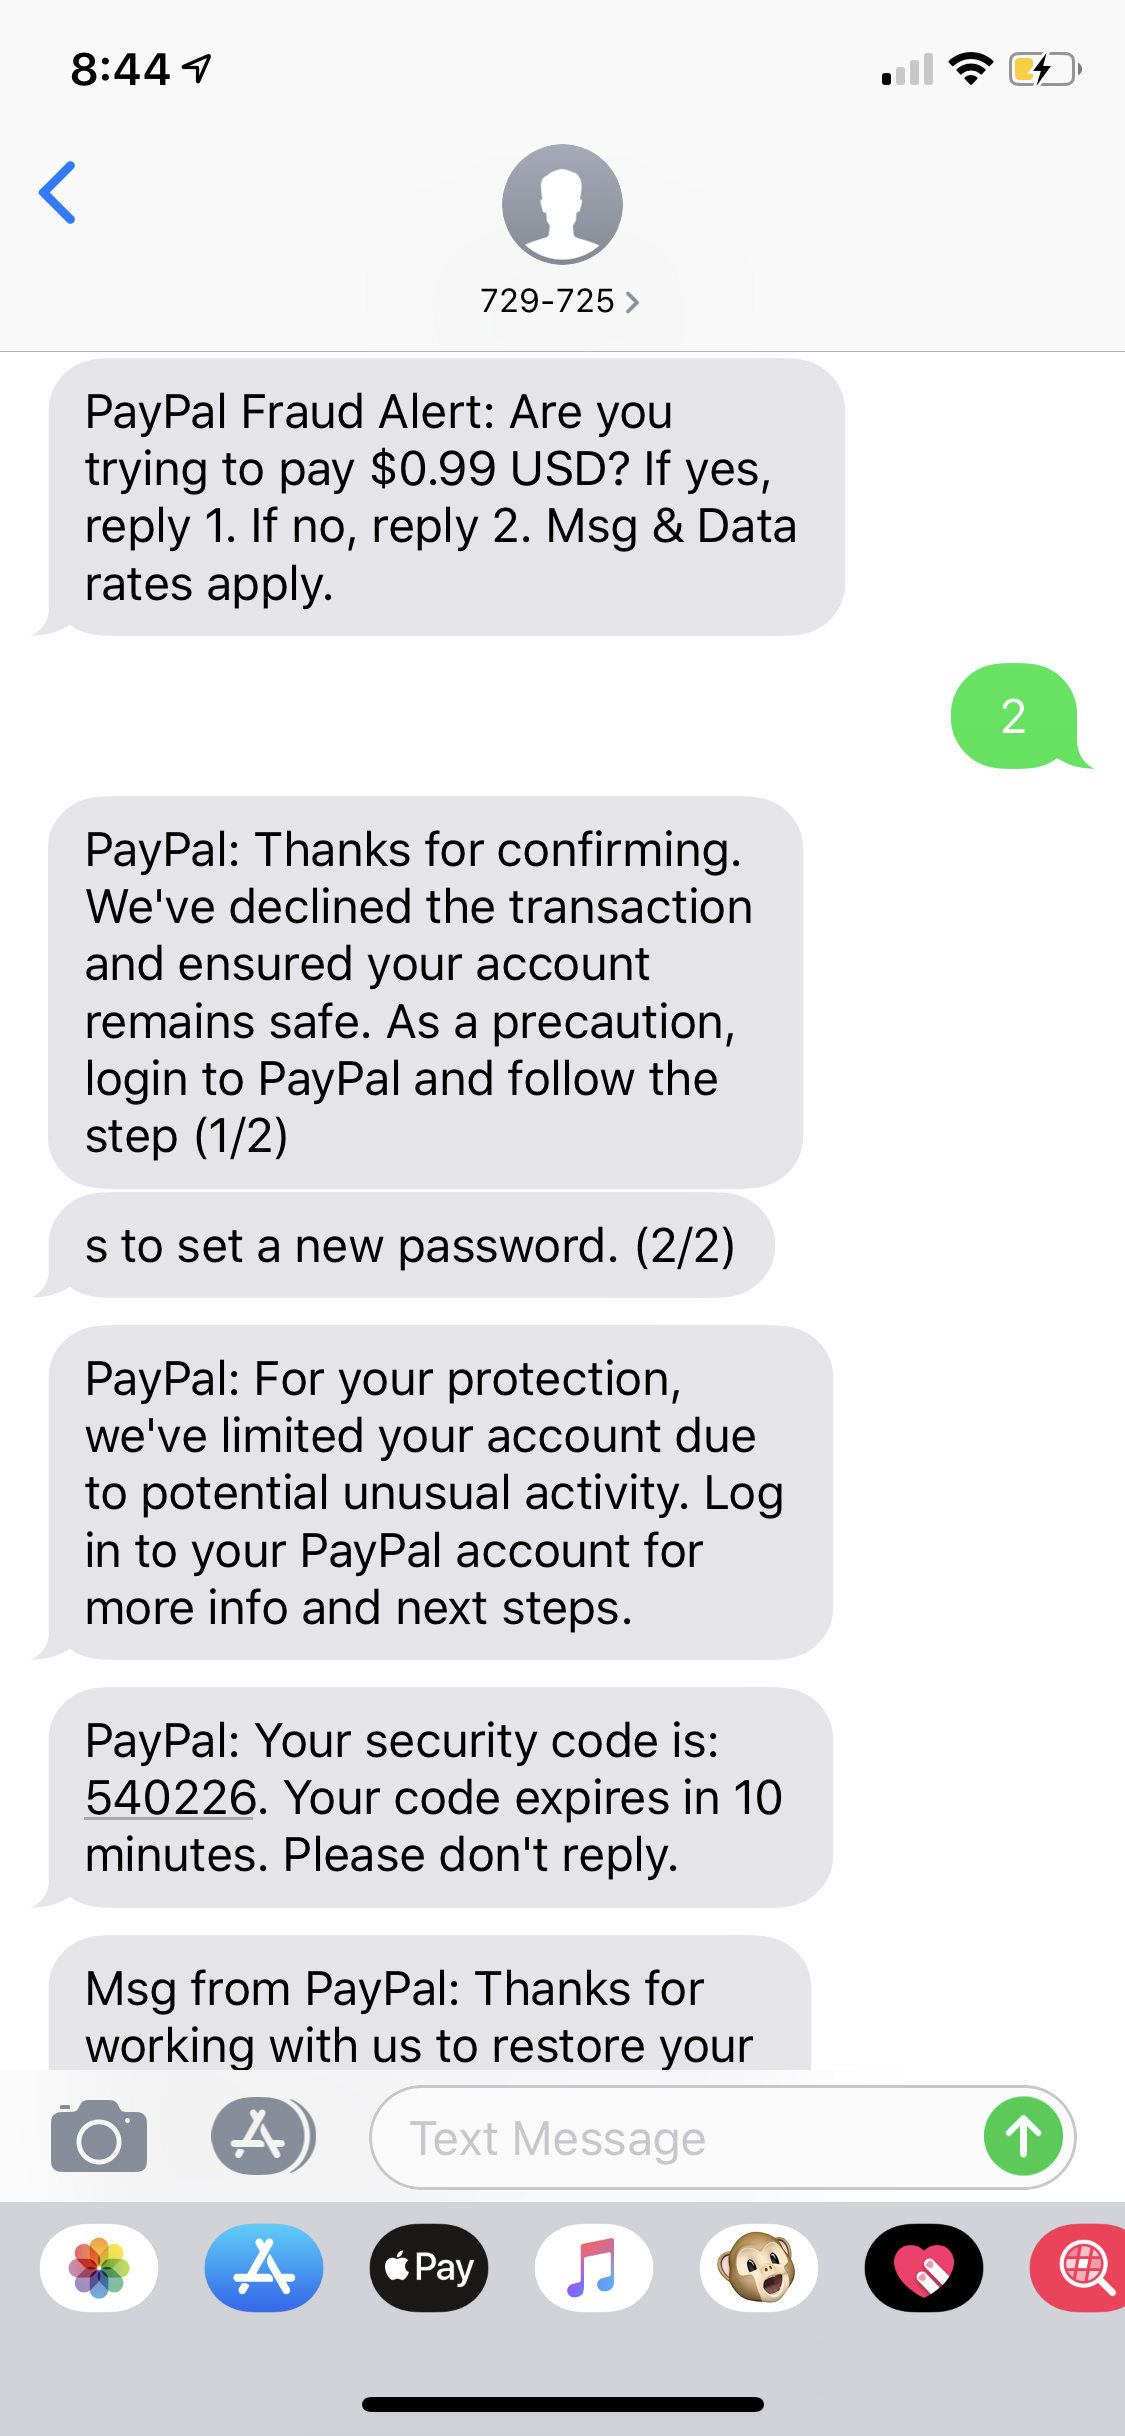 Why am I receiving emails or texts from PayPal when I don’t have an account? | PayPal US